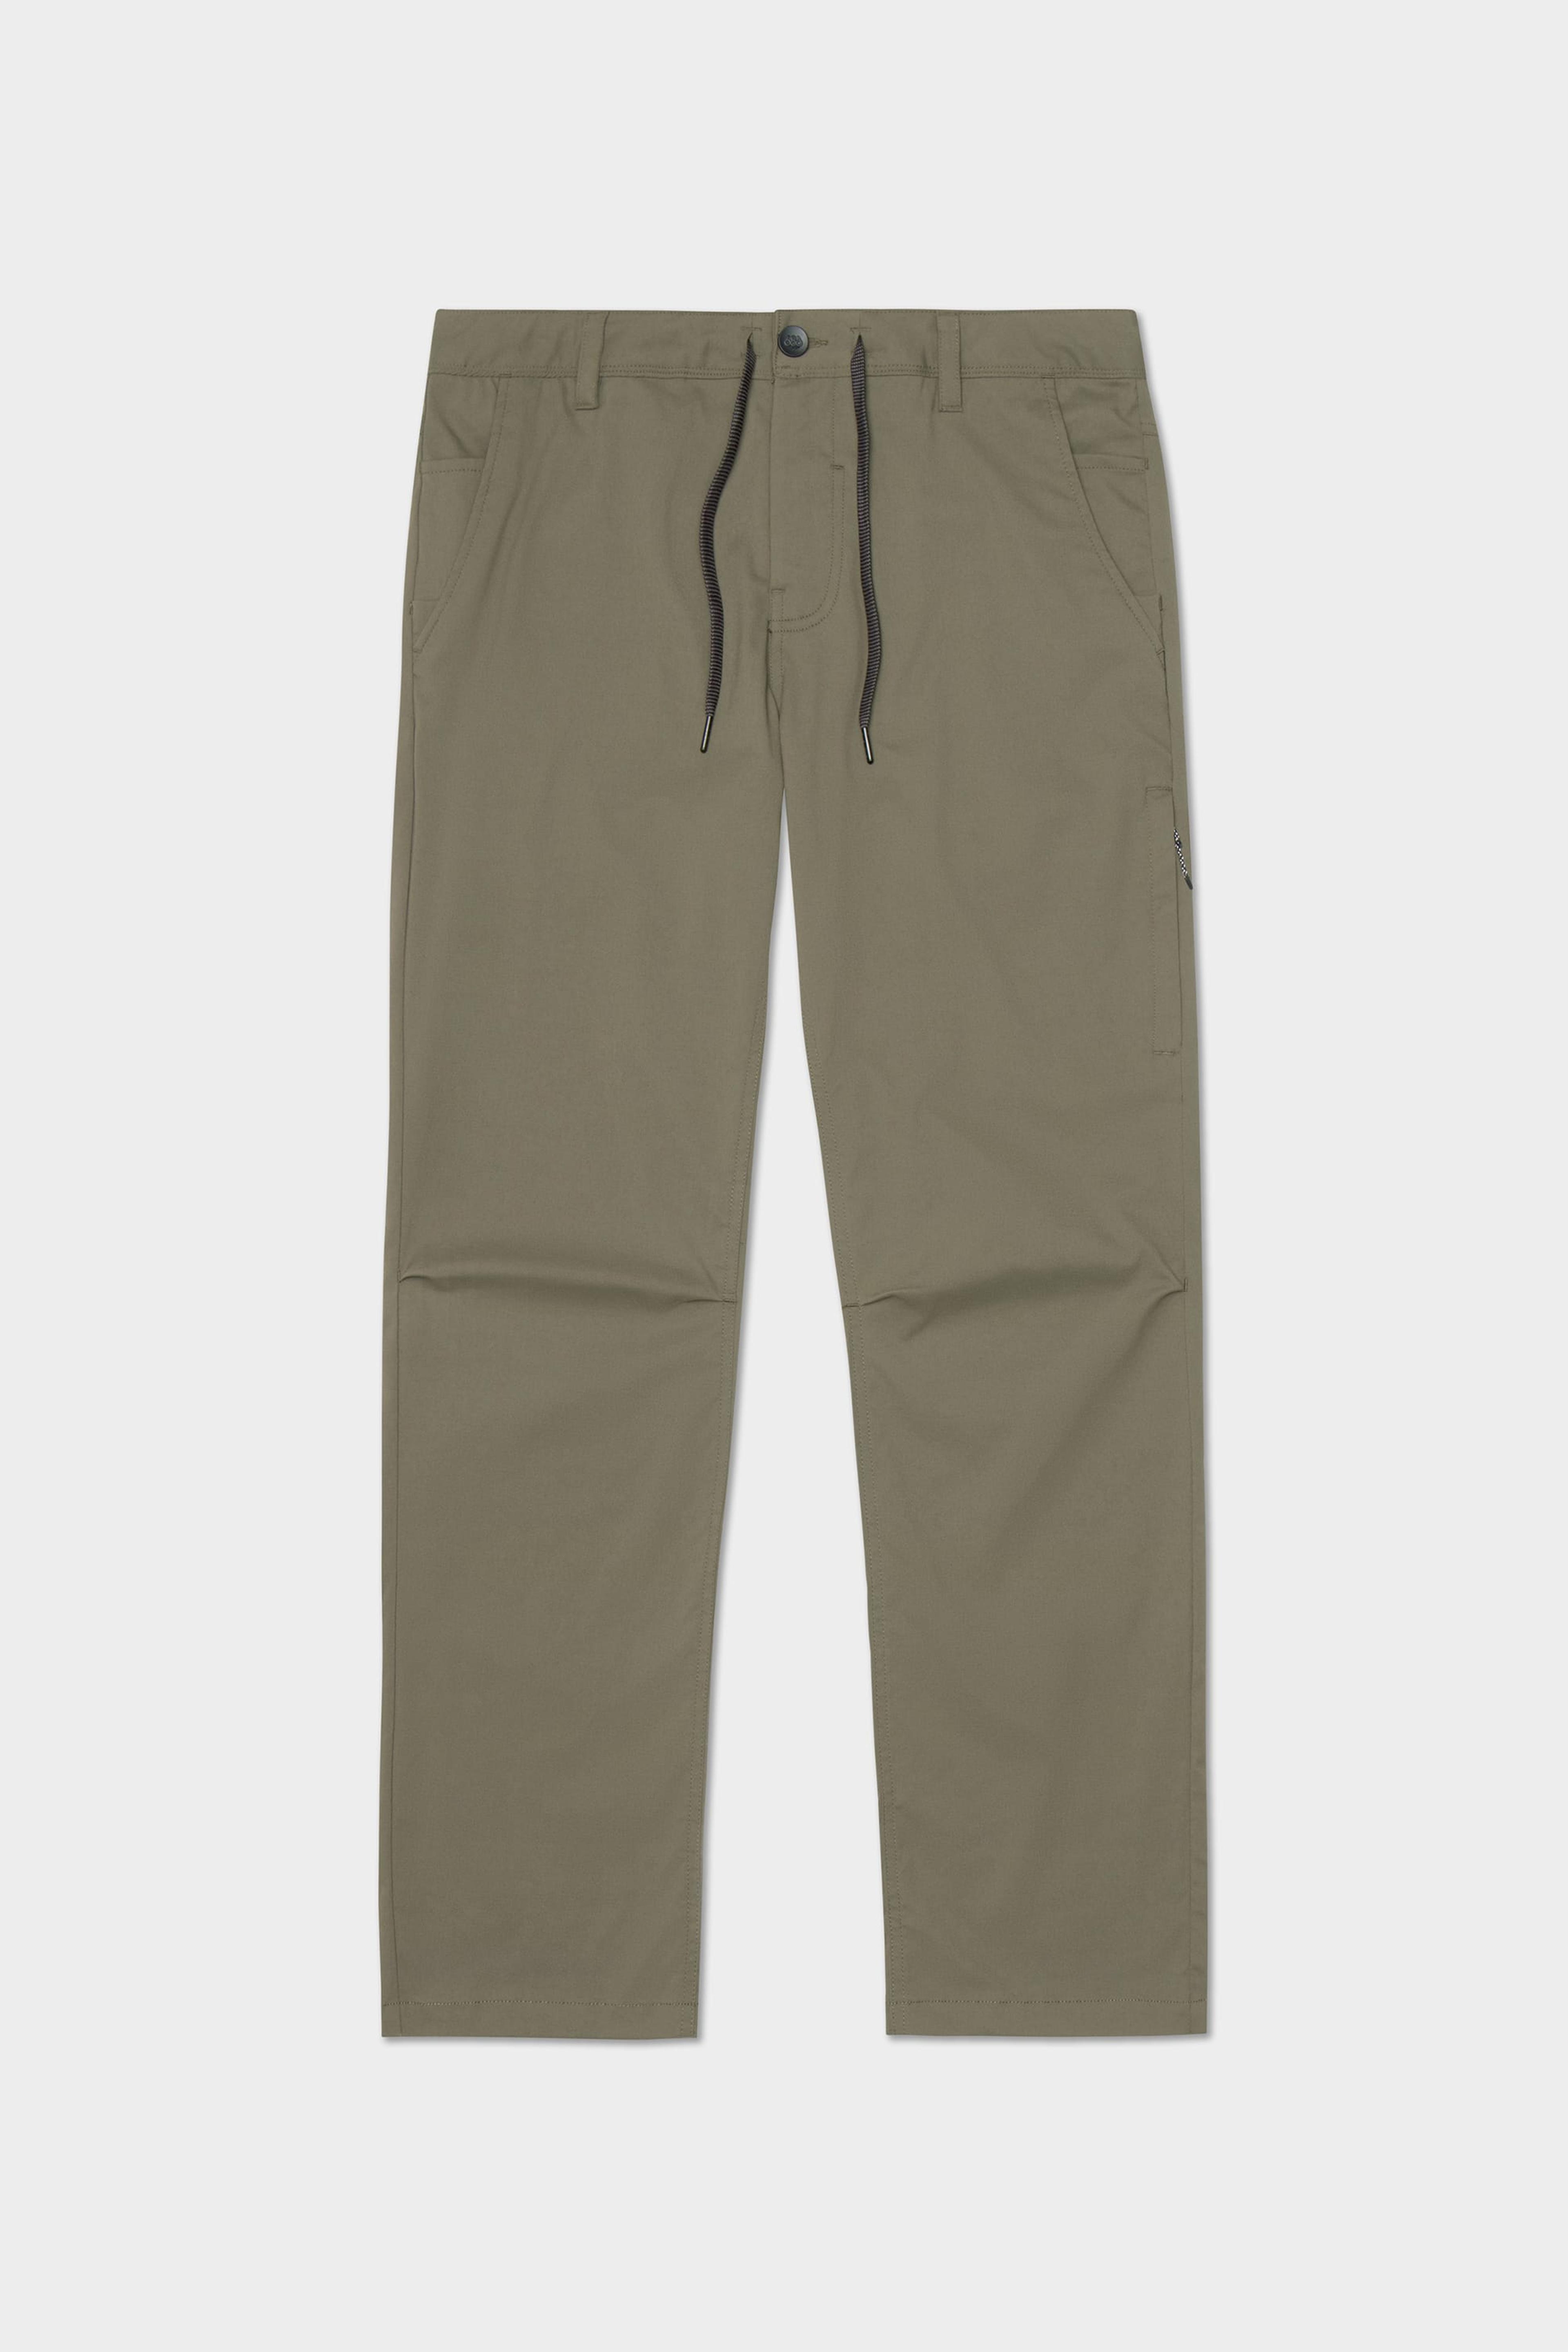 Alternate View 54 of 686 Men's Everywhere Pant - Relaxed Fit